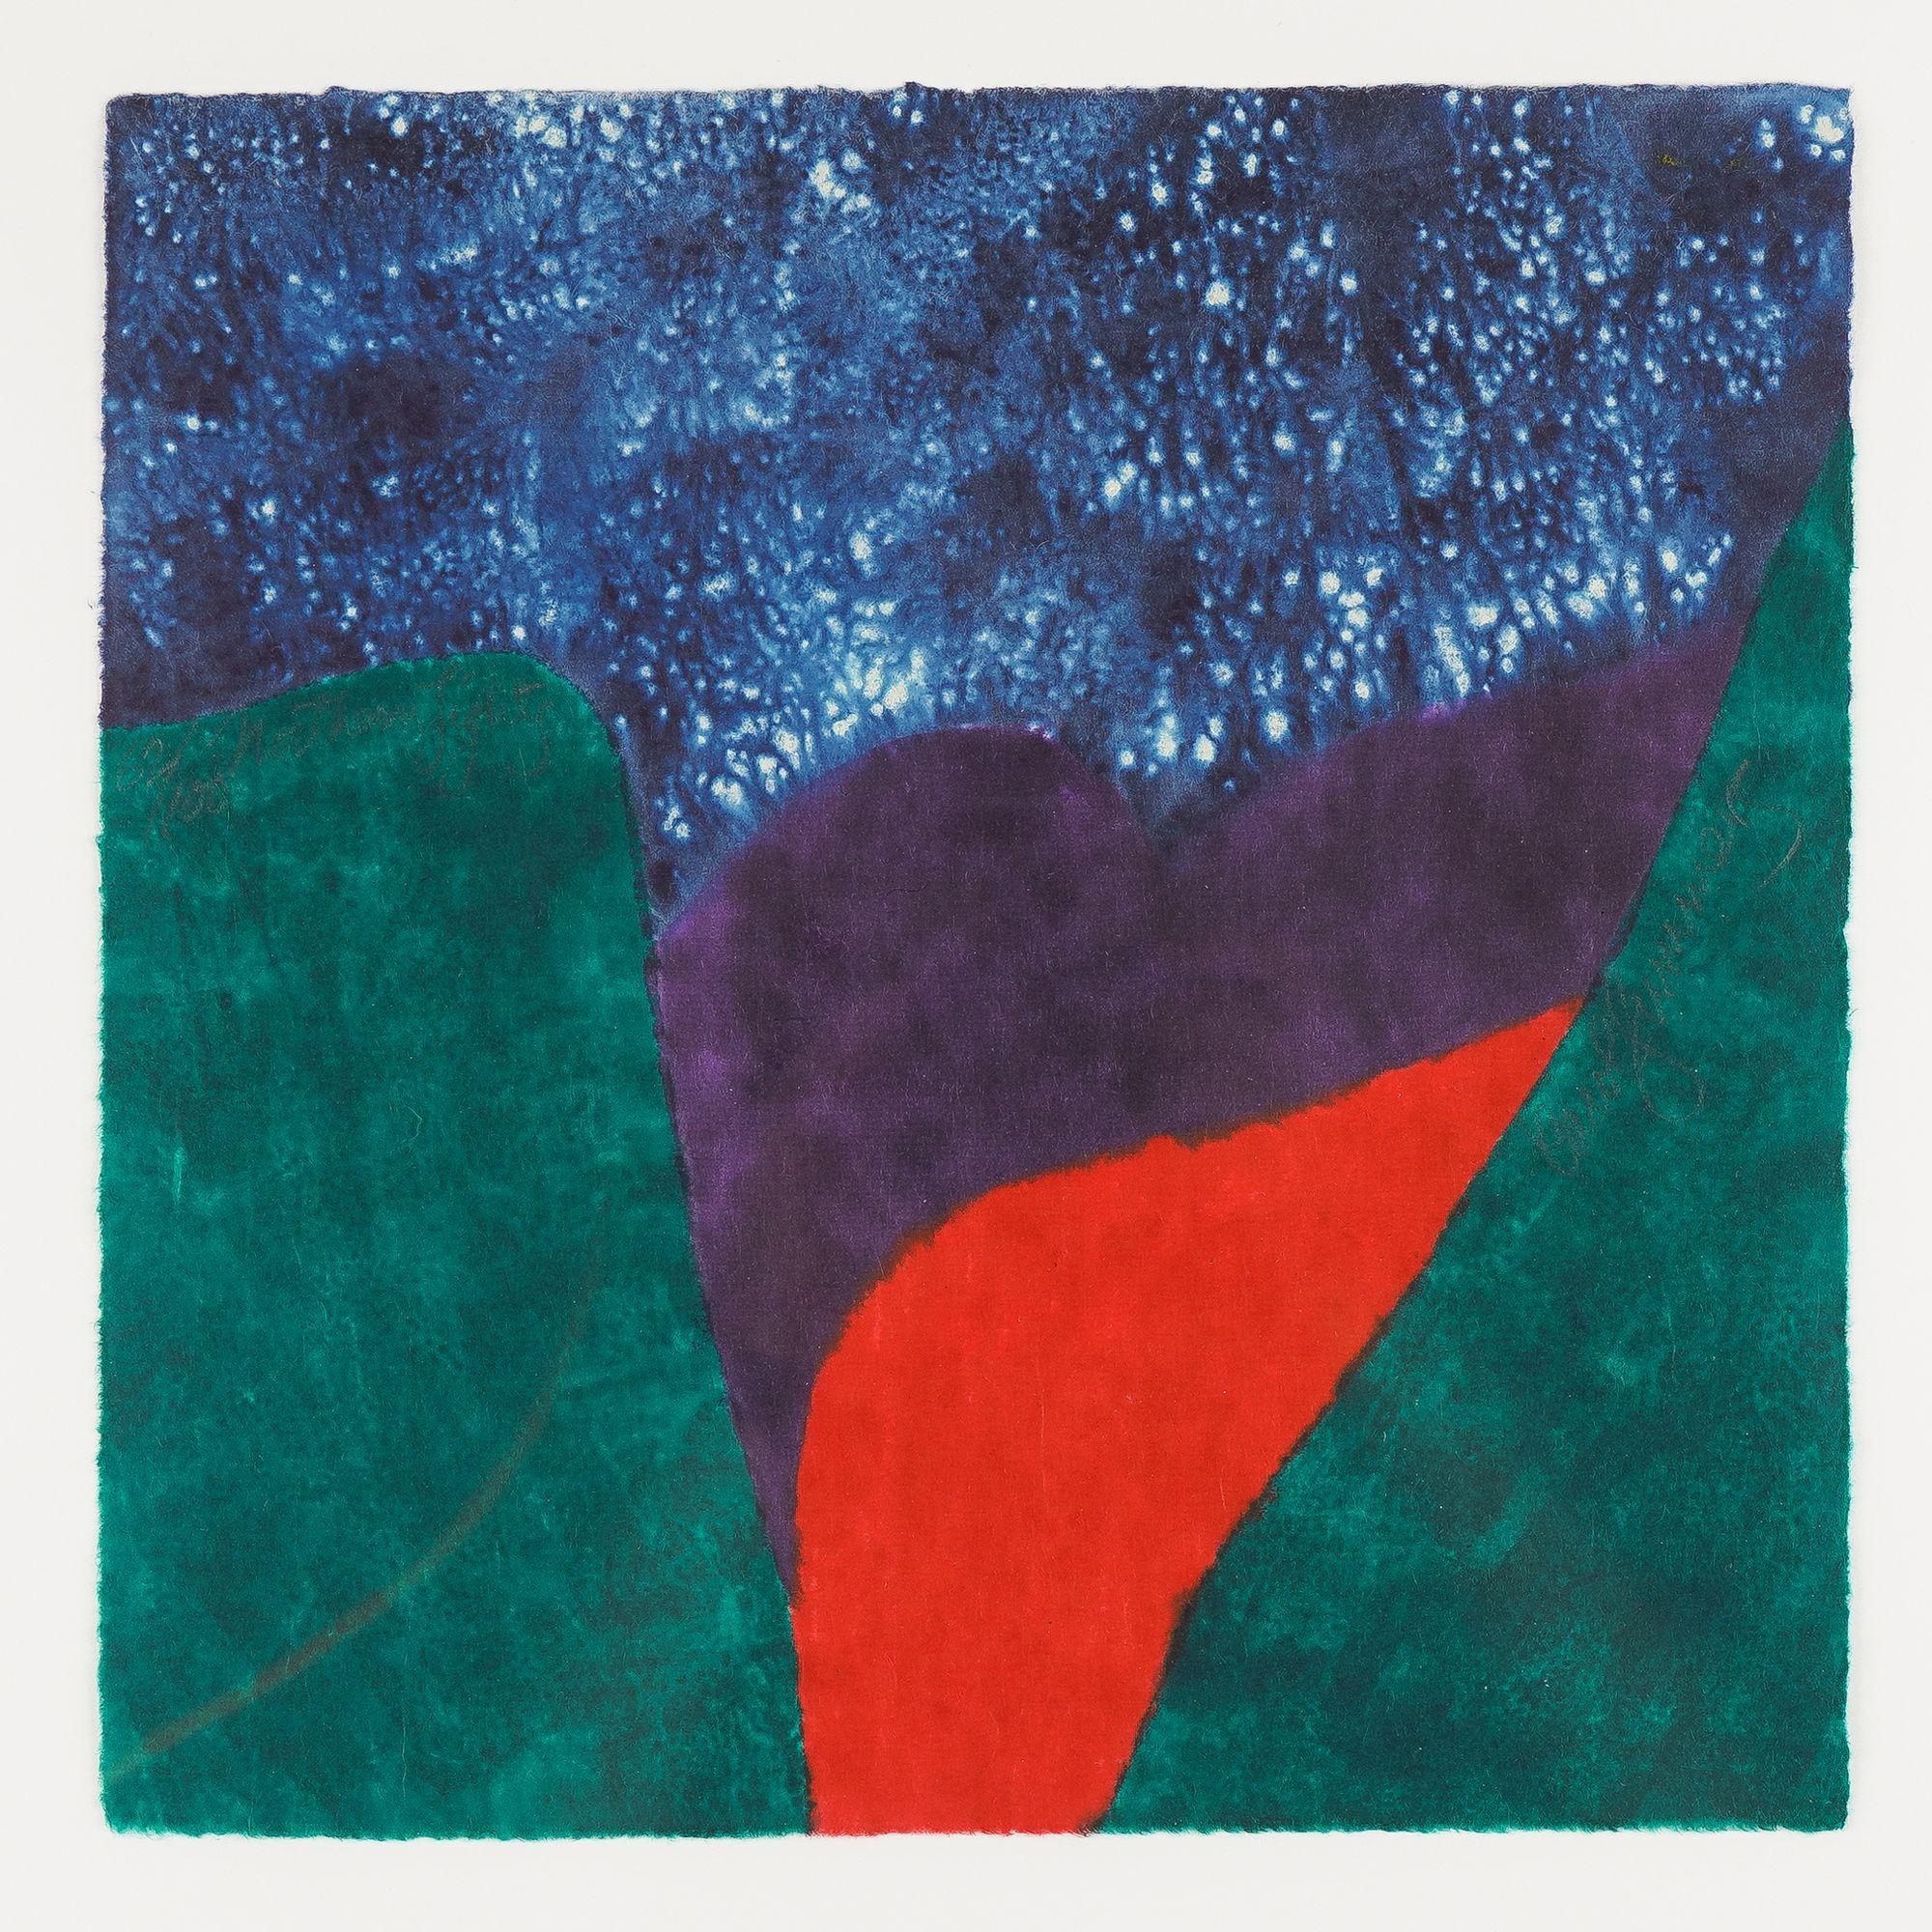 Polychrome abstract woodblock print in blue, green, purple, and red.

Signed, numbered, and dated in graphite in the work: 62/100

American, 2002.